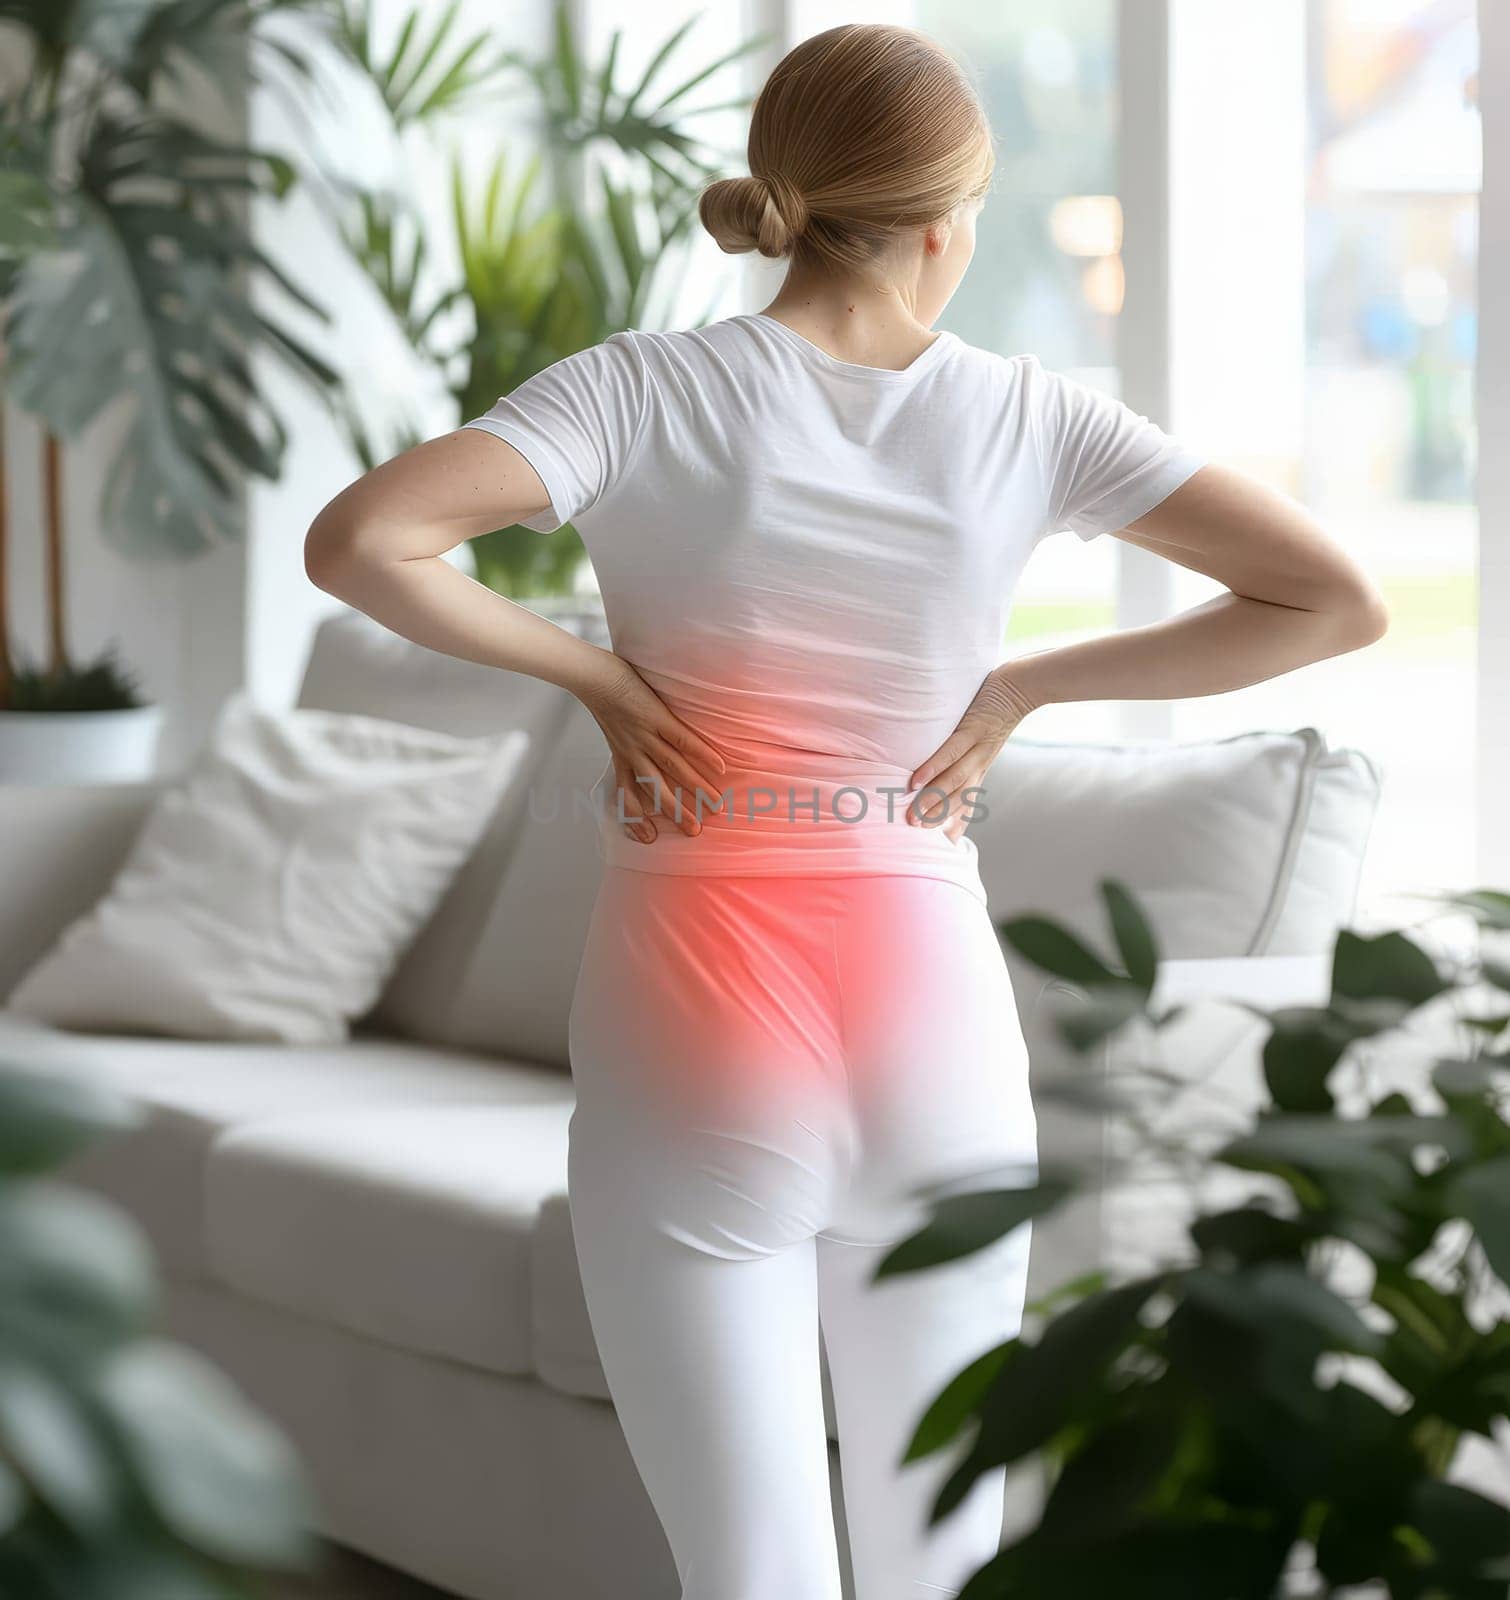 A woman in white attire stands in a bright living room, hands pressed to her lower back, indicating pain. The surrounding indoor plants contribute to tranquil home environment despite the discomfort. by sfinks